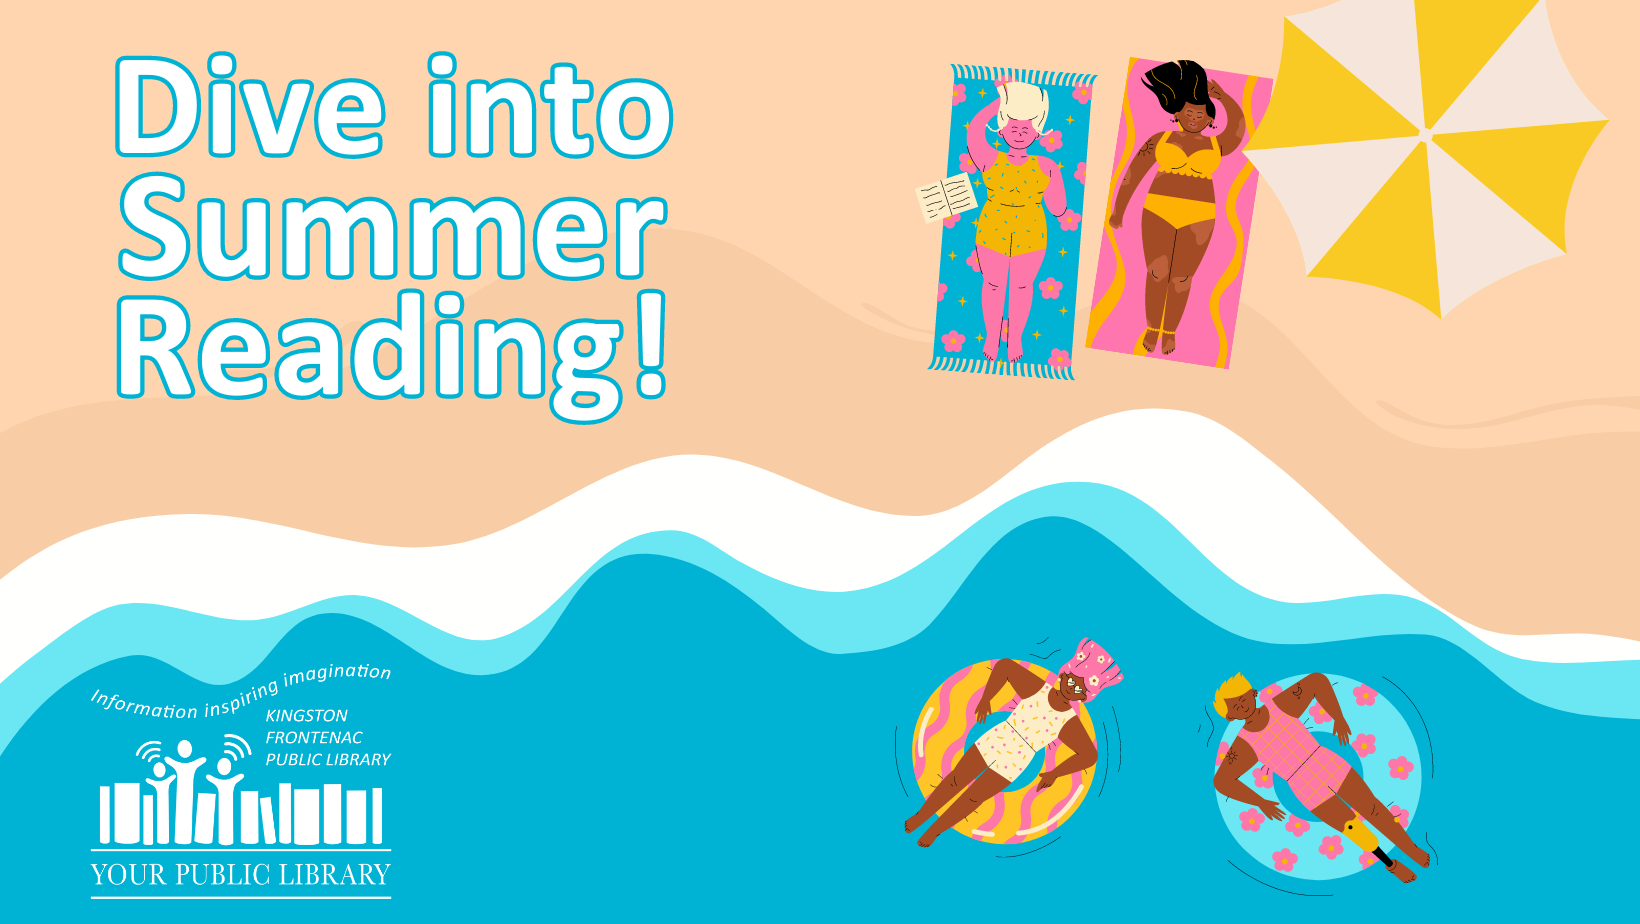 Illustrated people enjoying a beach and water, lying on towels in the sand or floating on tubes in the water. Text reads Dive into Summer Reading!